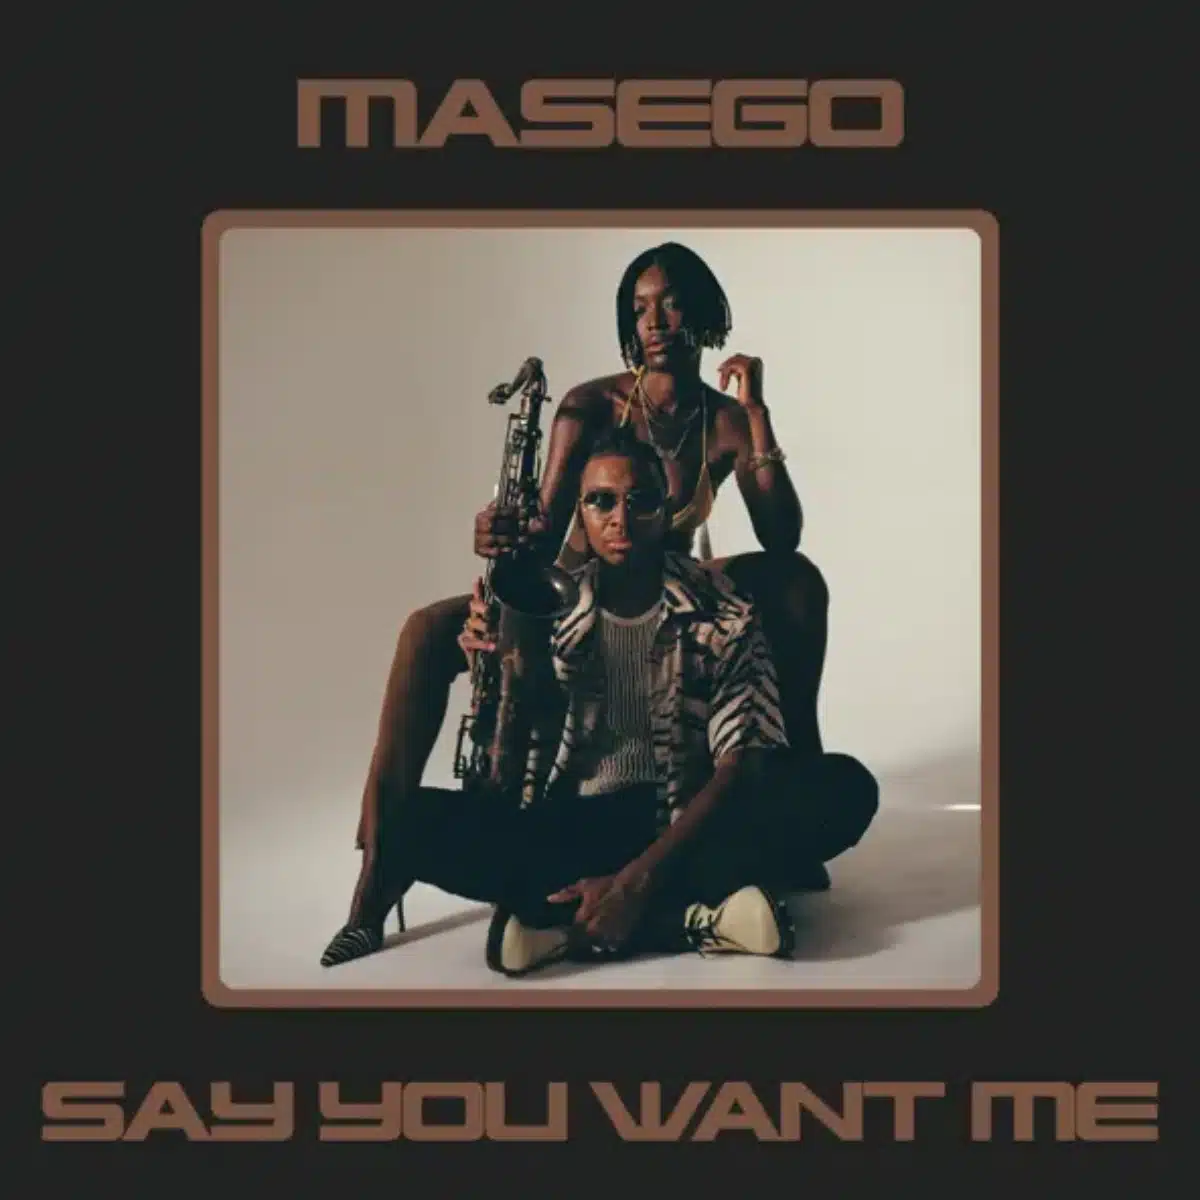 DOWNLOAD: Masego – “Say You Want Me” Mp3